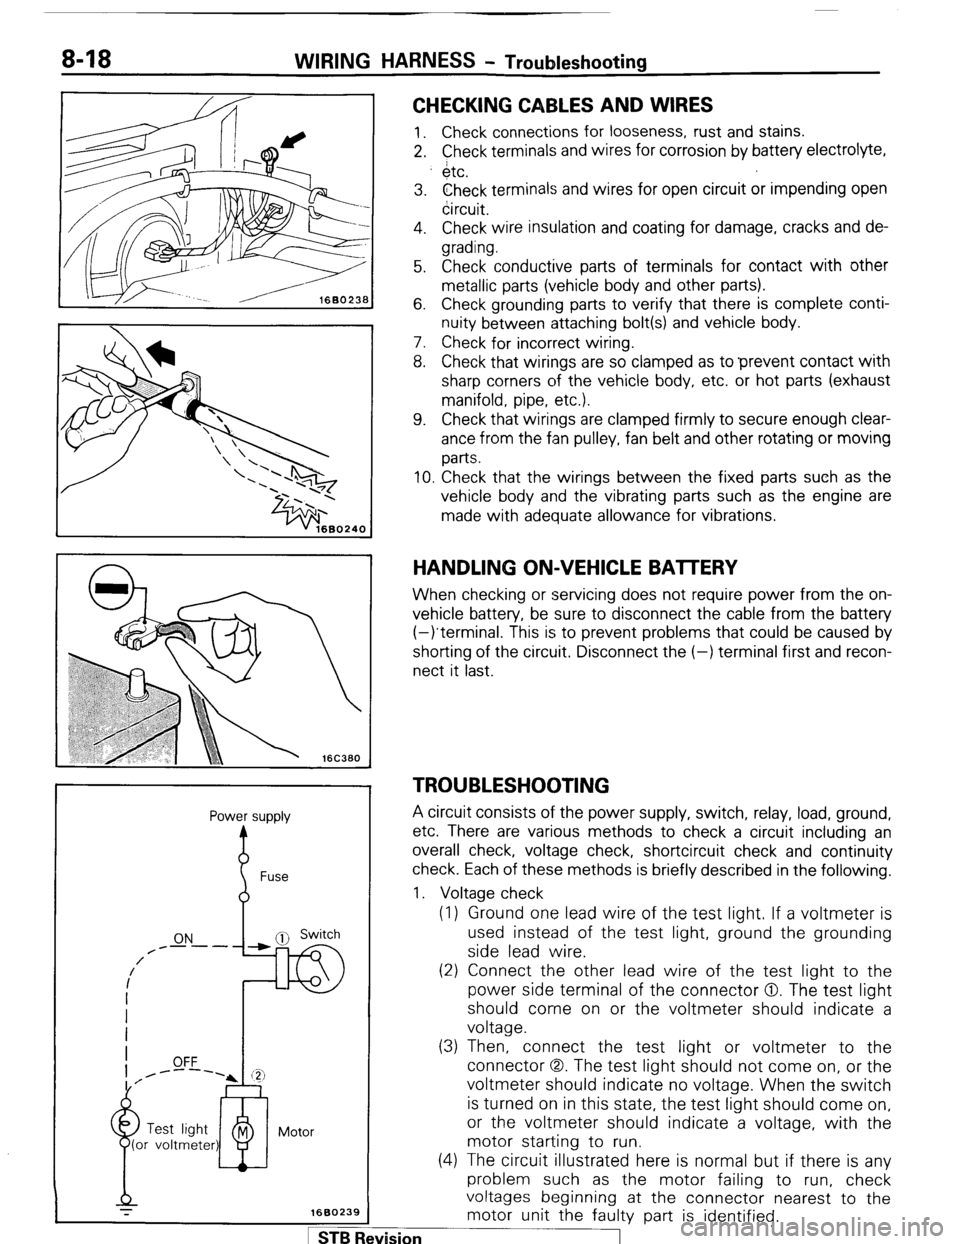 MITSUBISHI MONTERO 1987 1.G Workshop Manual WIRING HARNESS - Troubleshooting 
1660236 
Power 
supply 
h 
Fuse 
ON 
/---- 
/ 
/ 
Motor 
1660239 
CHECKING CABLES AND WIRES 
1. Check connections for looseness, rust and stains. 
2. Check terminals 